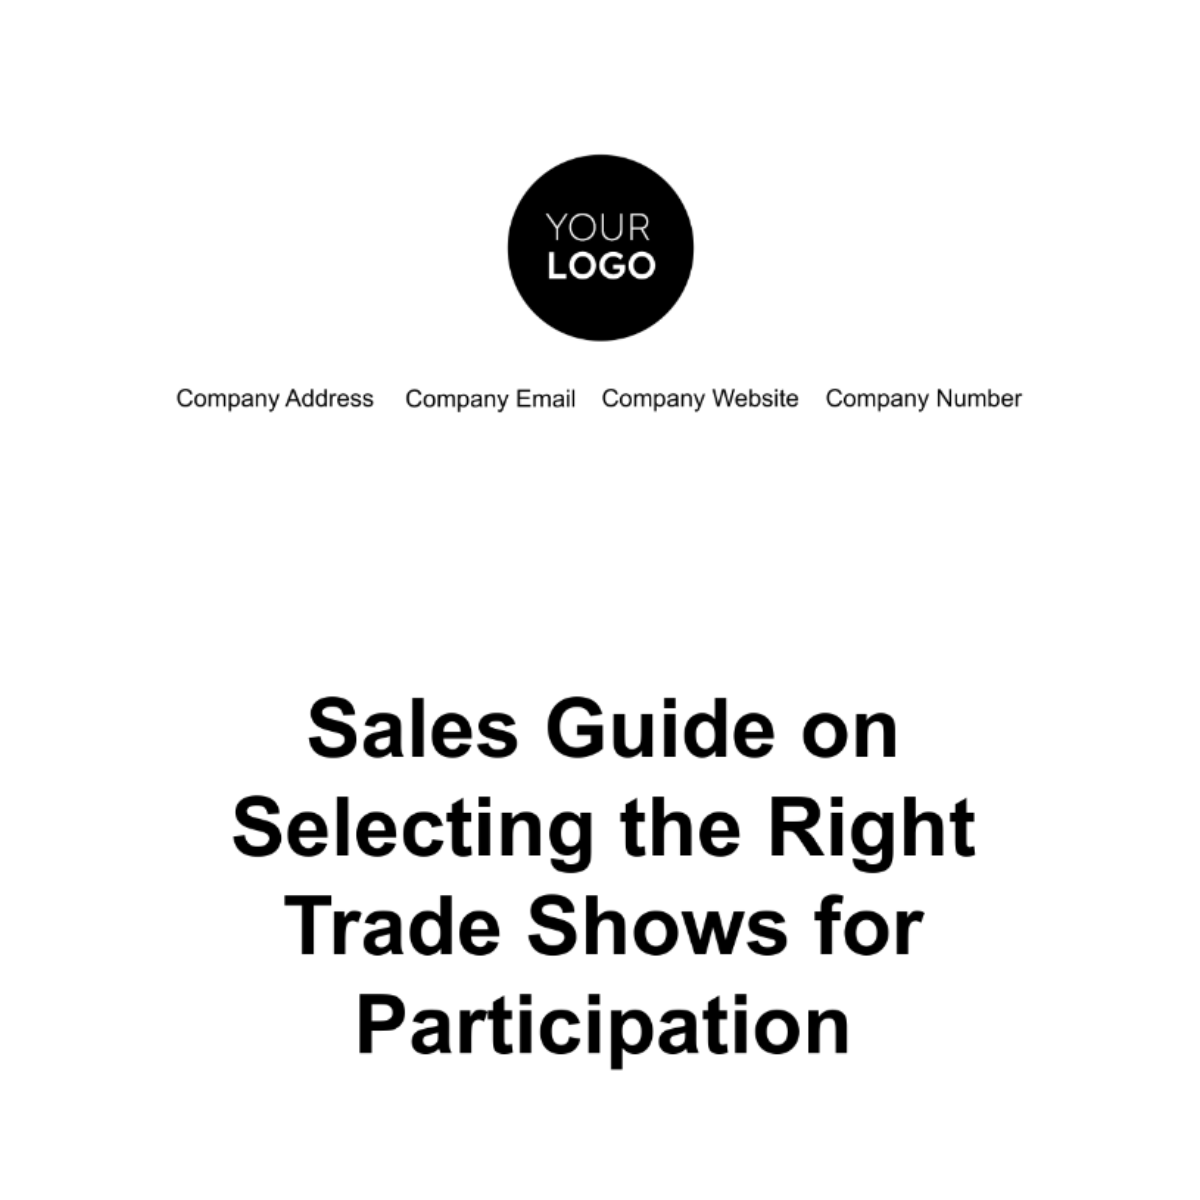 Sales Guide on Selecting the Right Trade Shows for Participation Template